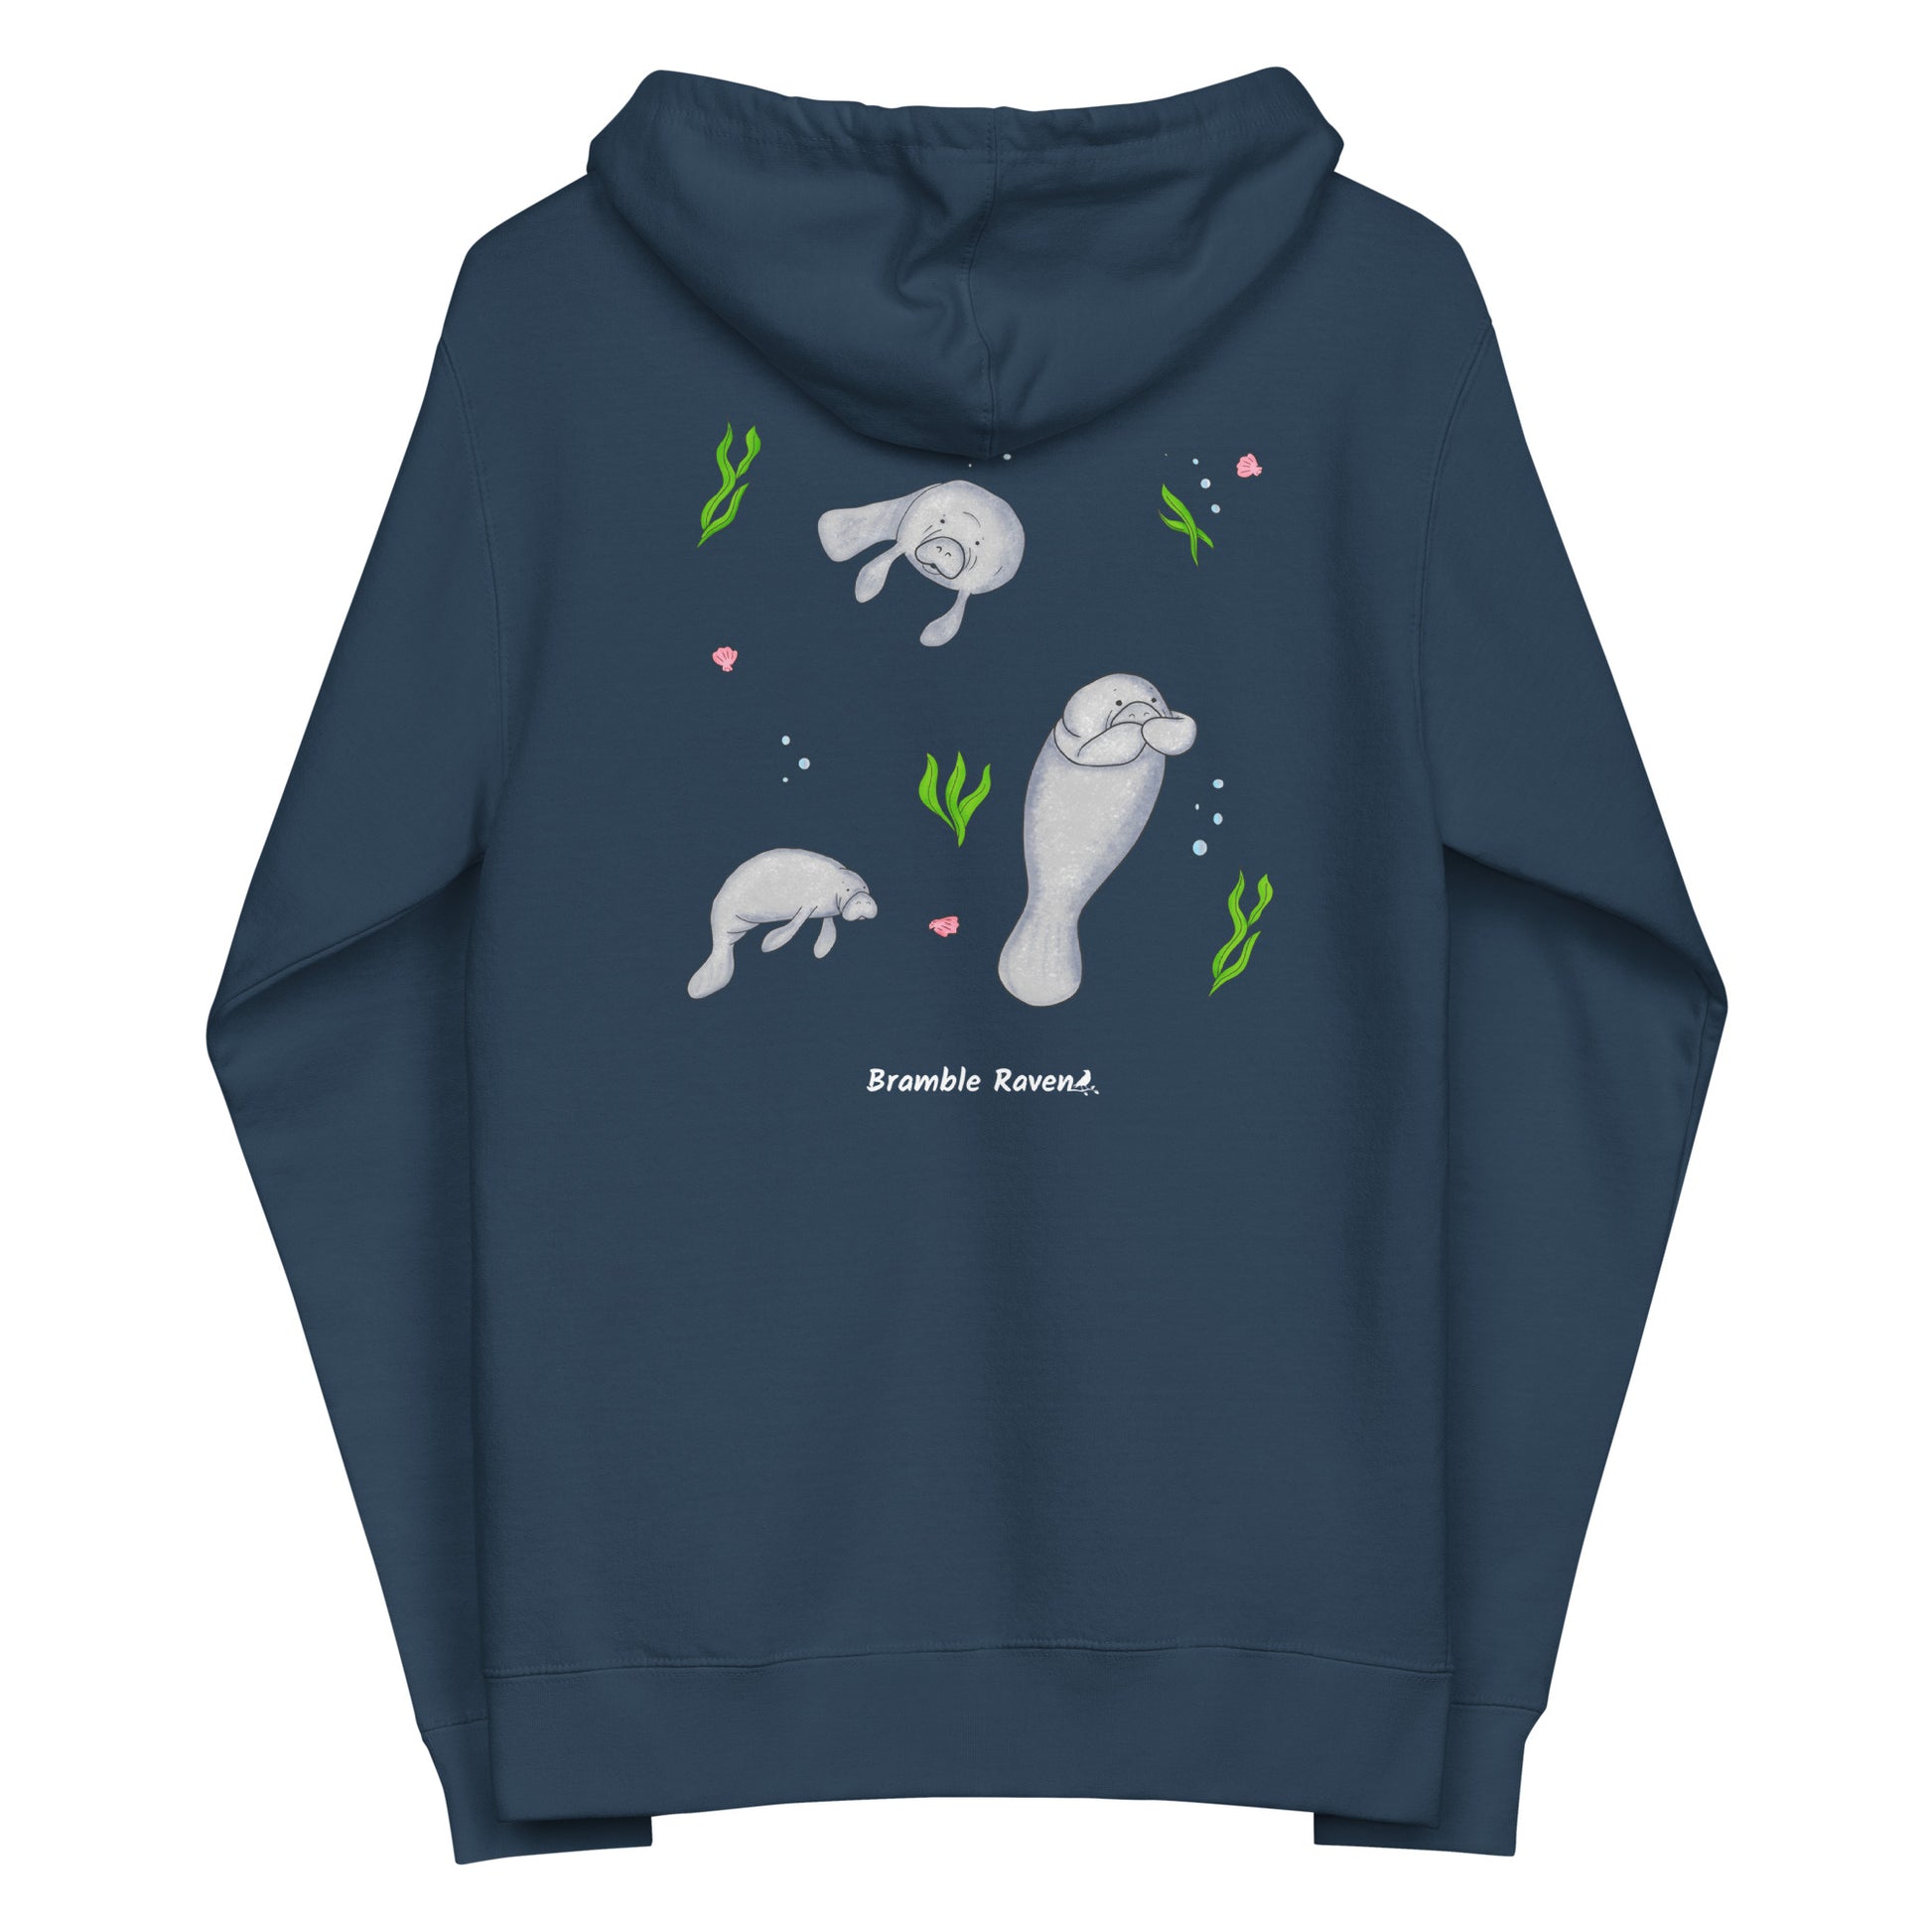 Navy blue colored unisex zip-up hoodie. Features three manatees with seaweed, seashells, and bubbles on the back. It is made of soft, premium quality fleece fabric and has a jersey-lined hood. Made with 100% cotton face and 80% cotton, 20% polyester blend fleece. Features metal eyelets and zipper.